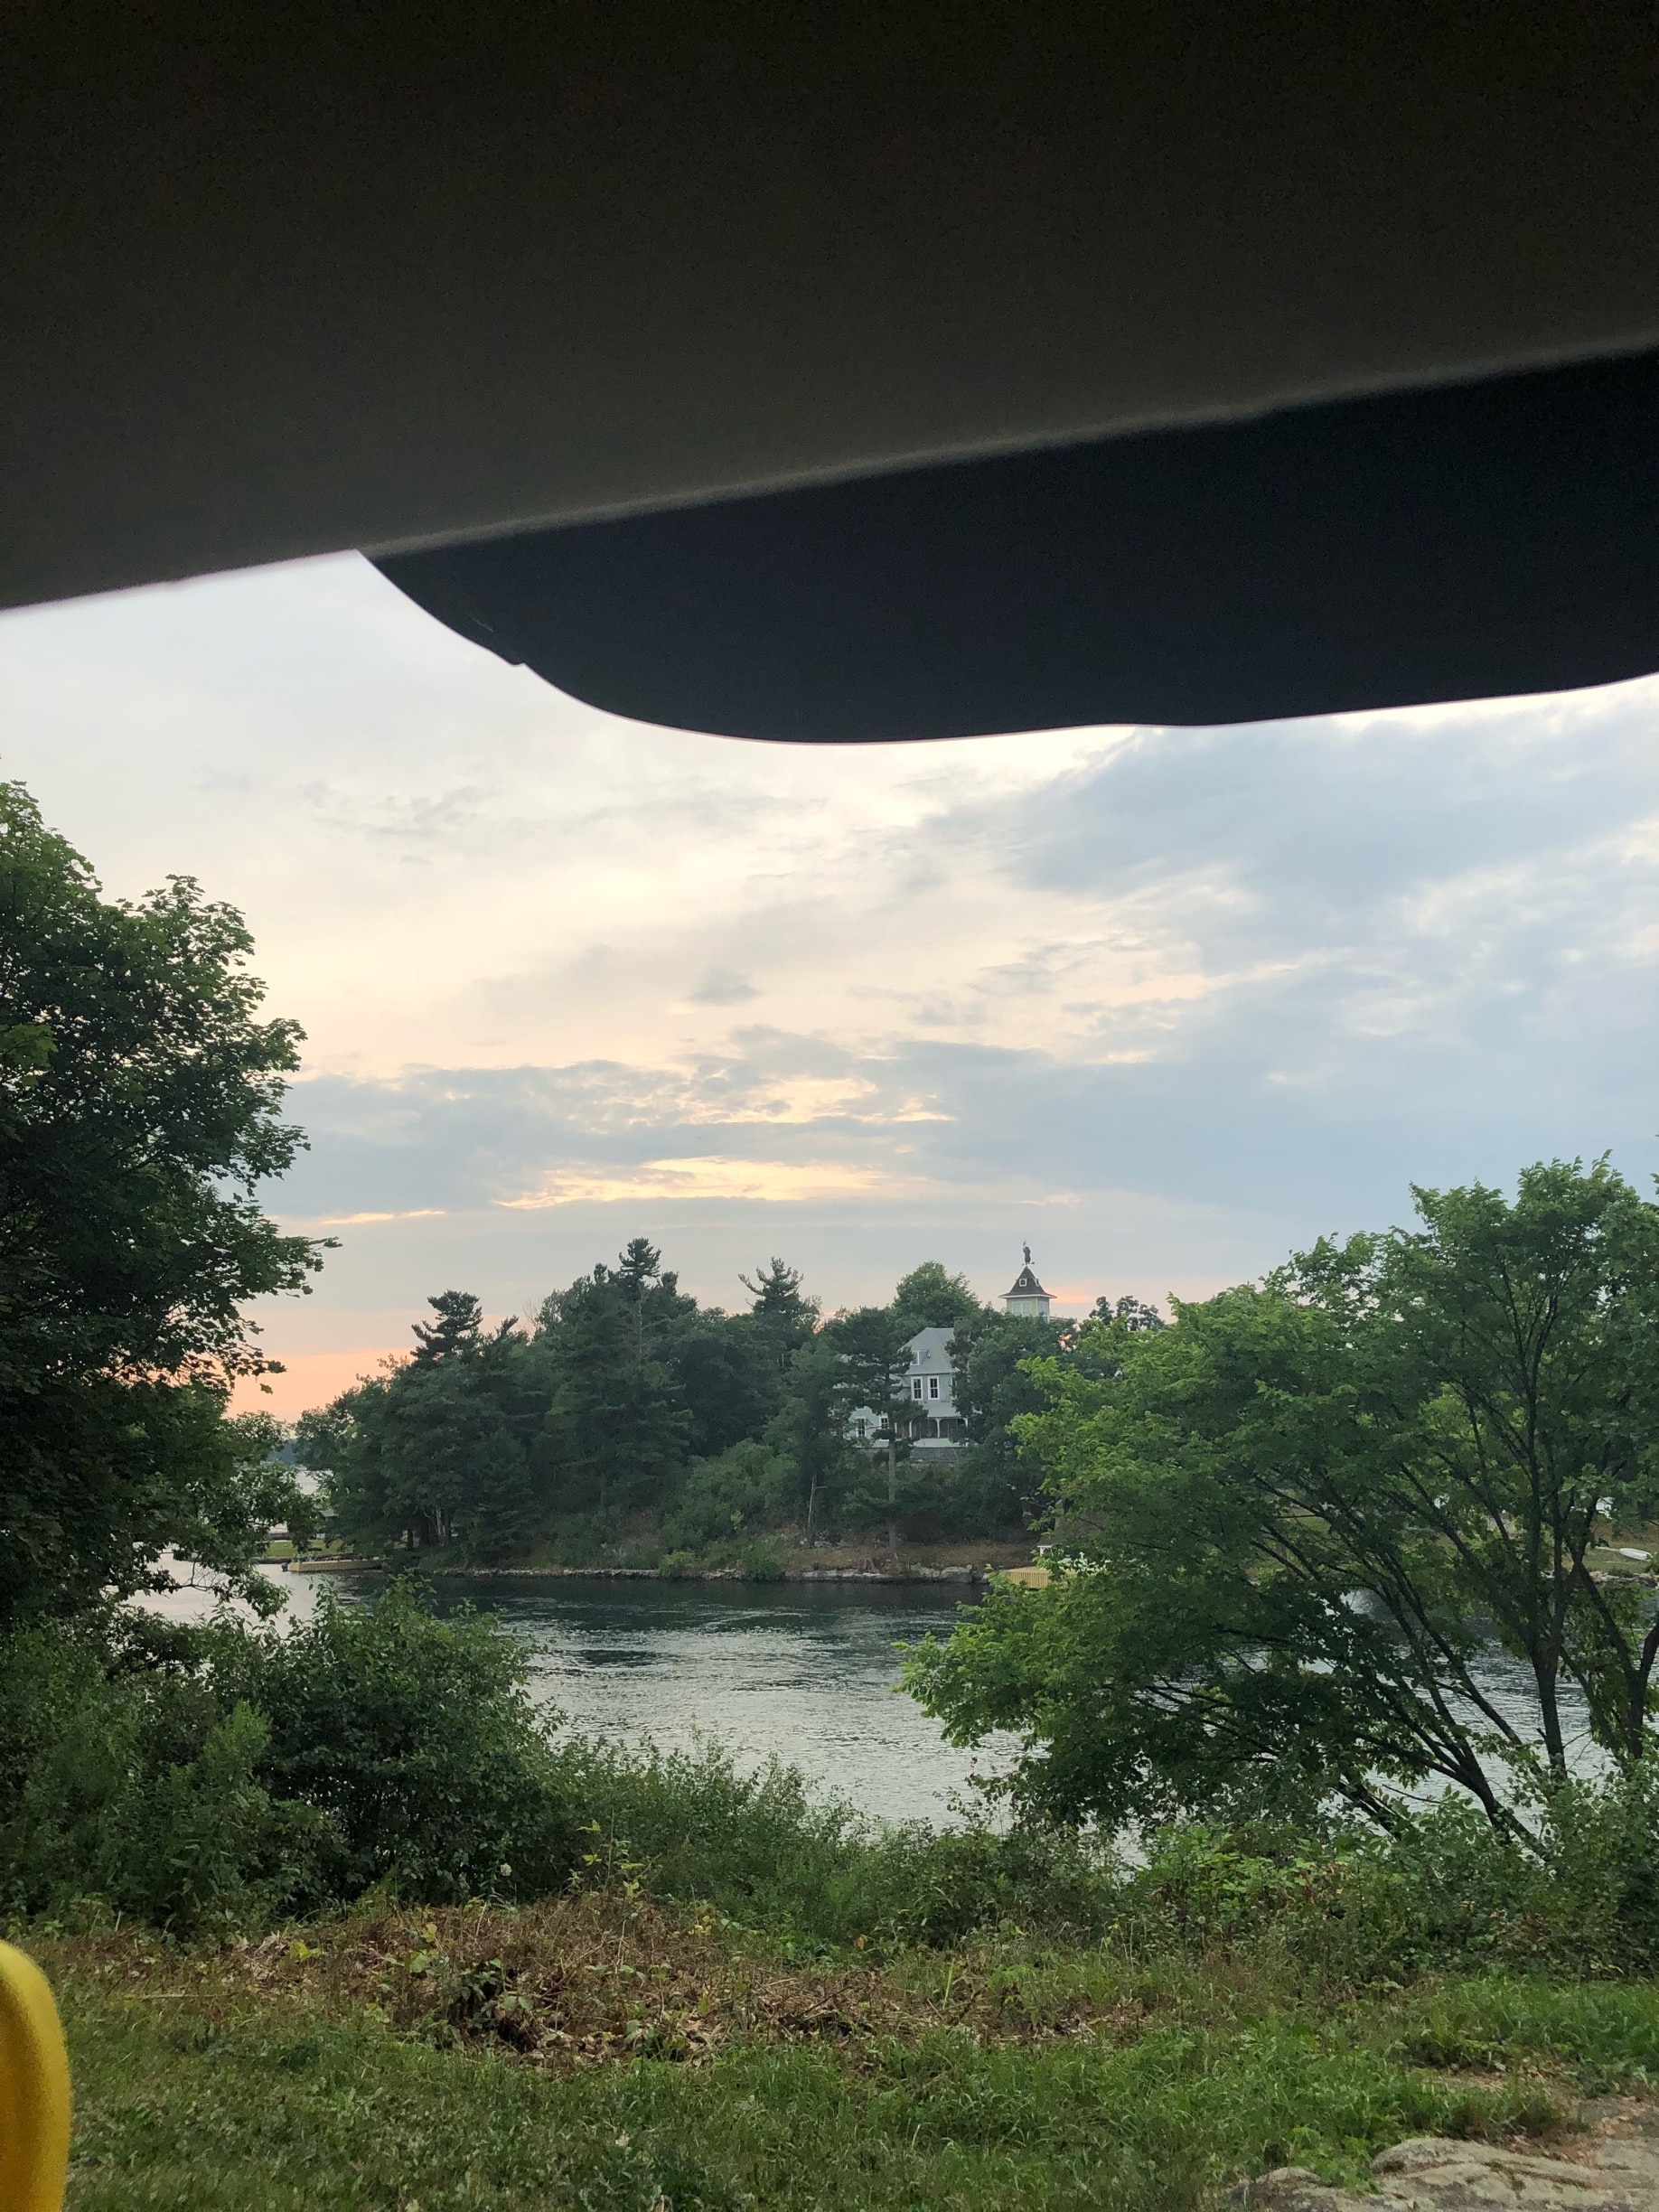 This is the view from the back of my Jeep in campsite #23; right on the river and only $18 per night!  Perfect place to car camp.